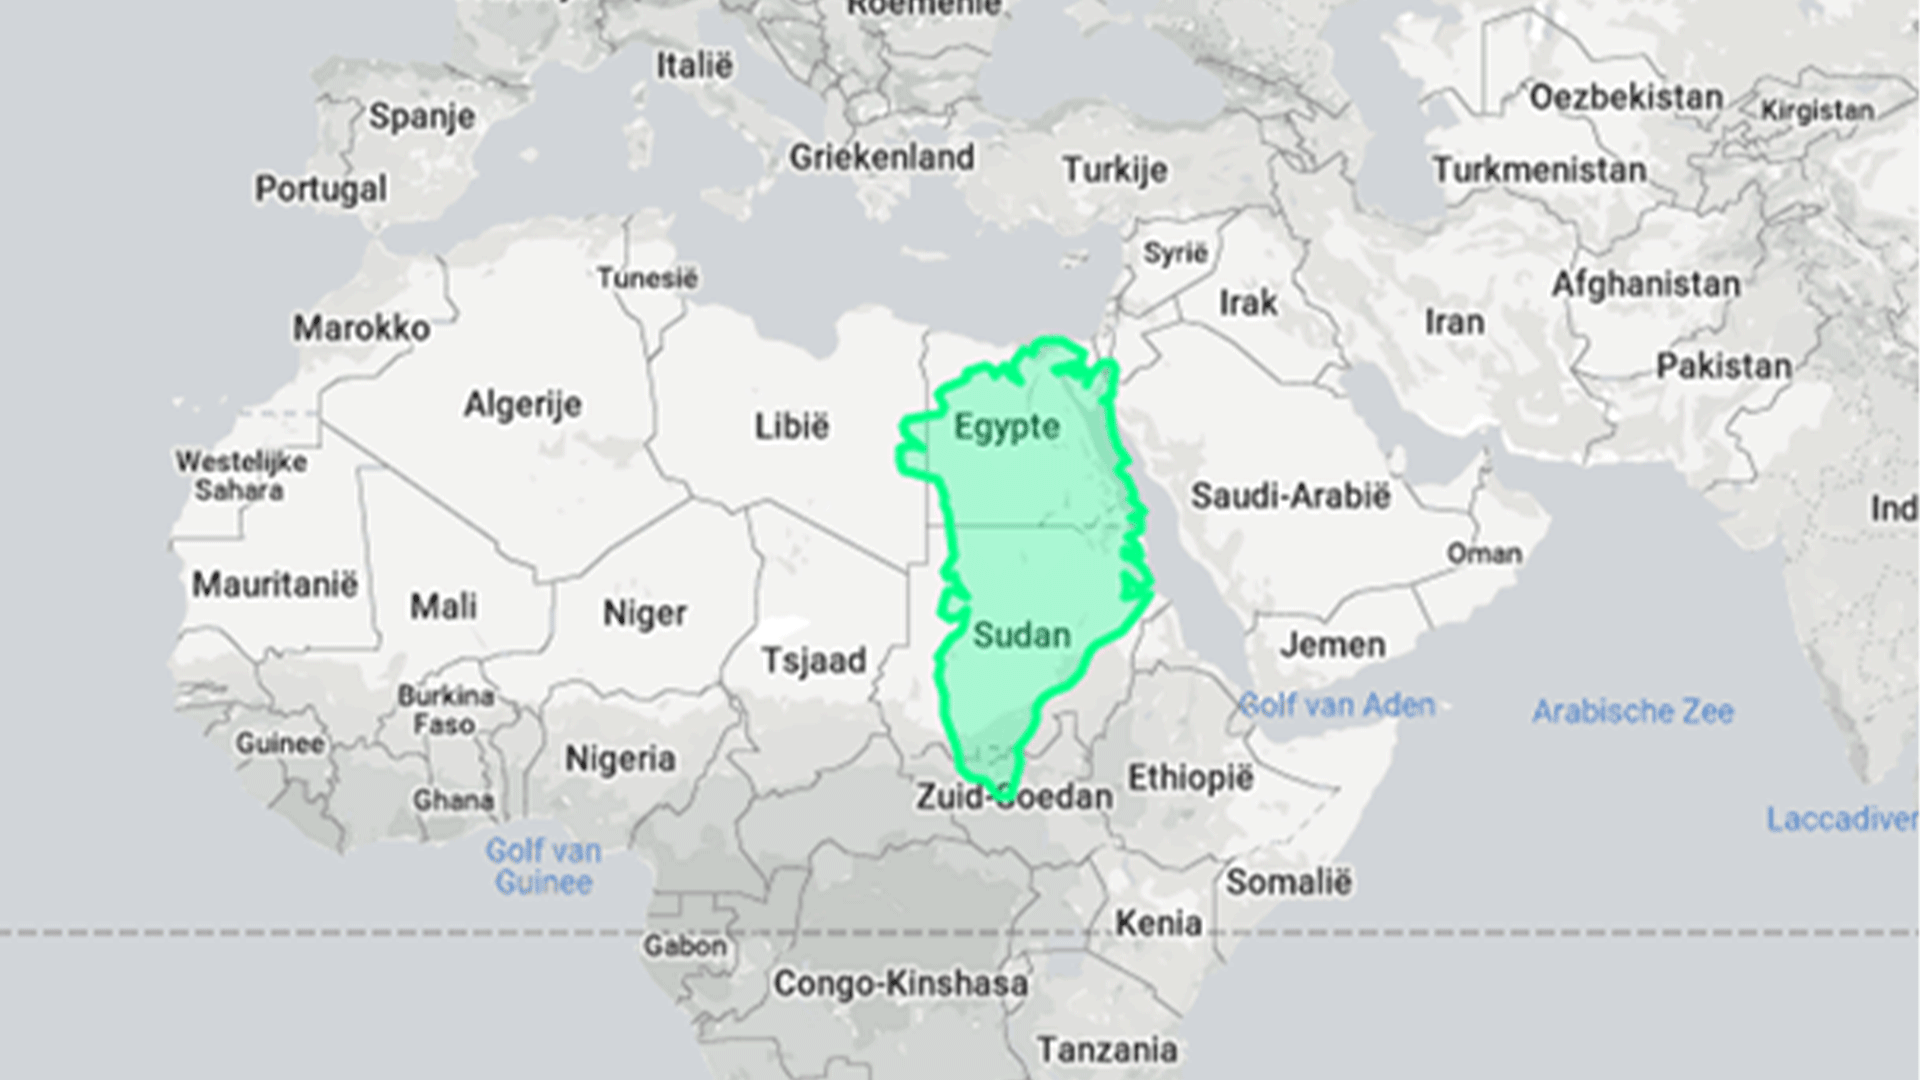 greenland-real-size-comparison-Africa